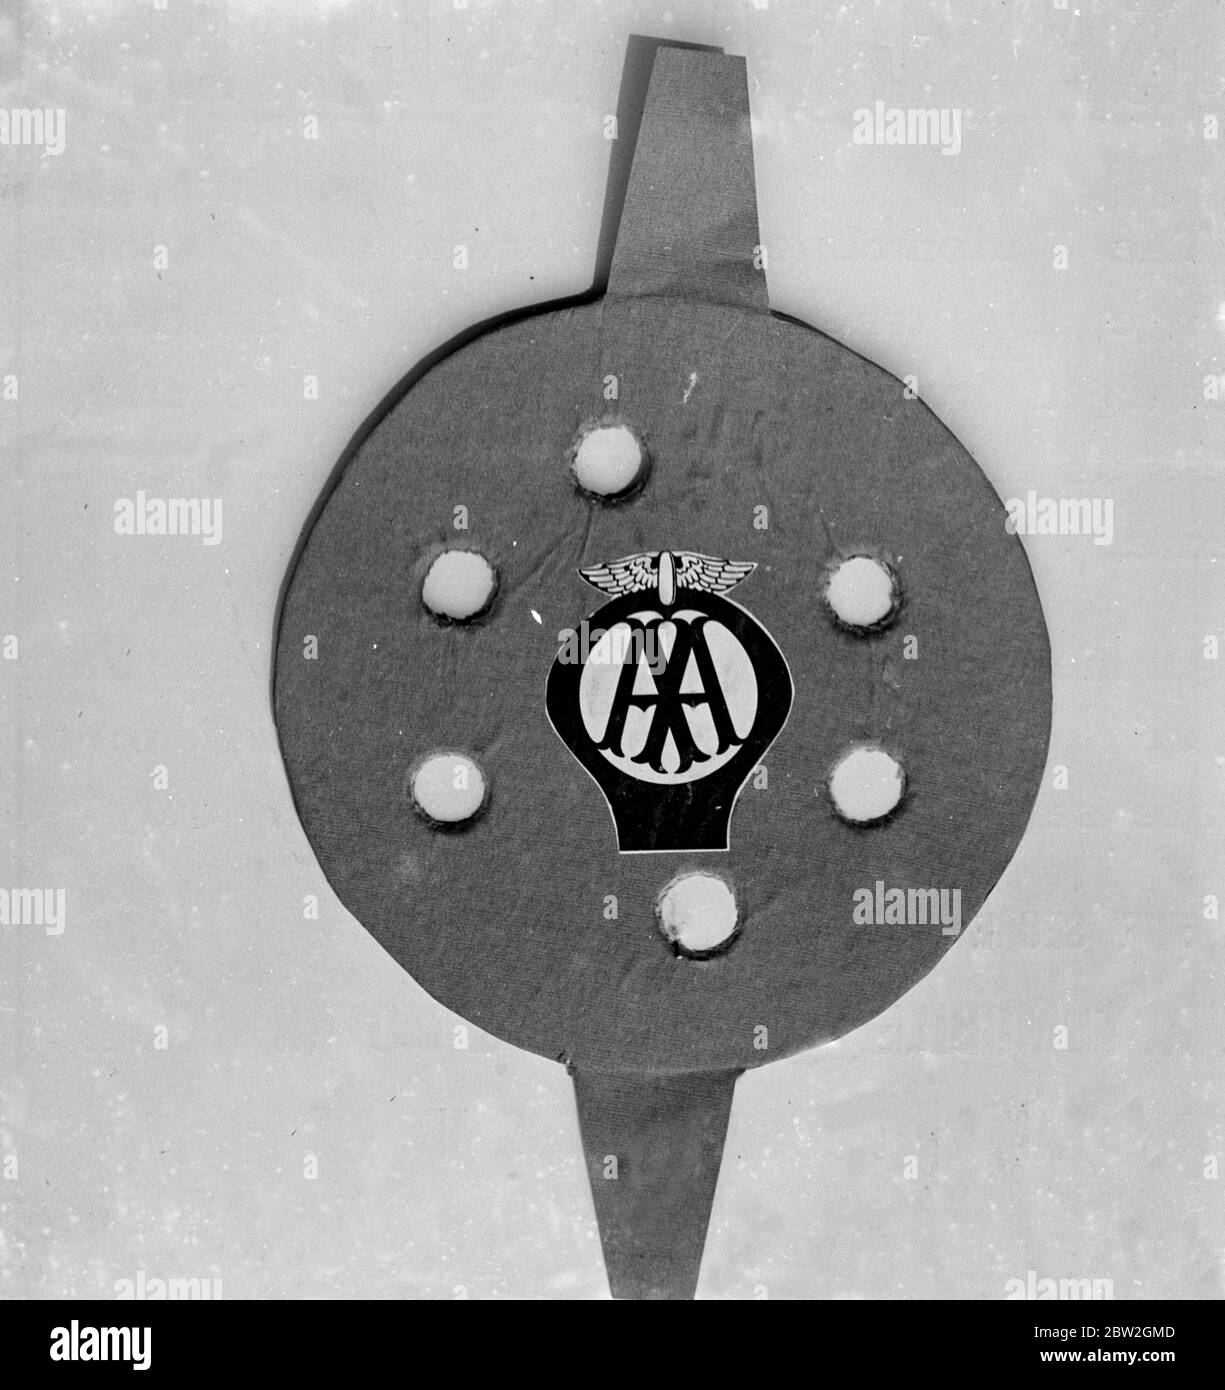 New lamp disc being manufactured for the automobile association and motor union for the use of motorists when entering the ares where by the new order such discs are compulsory. Stock Photo